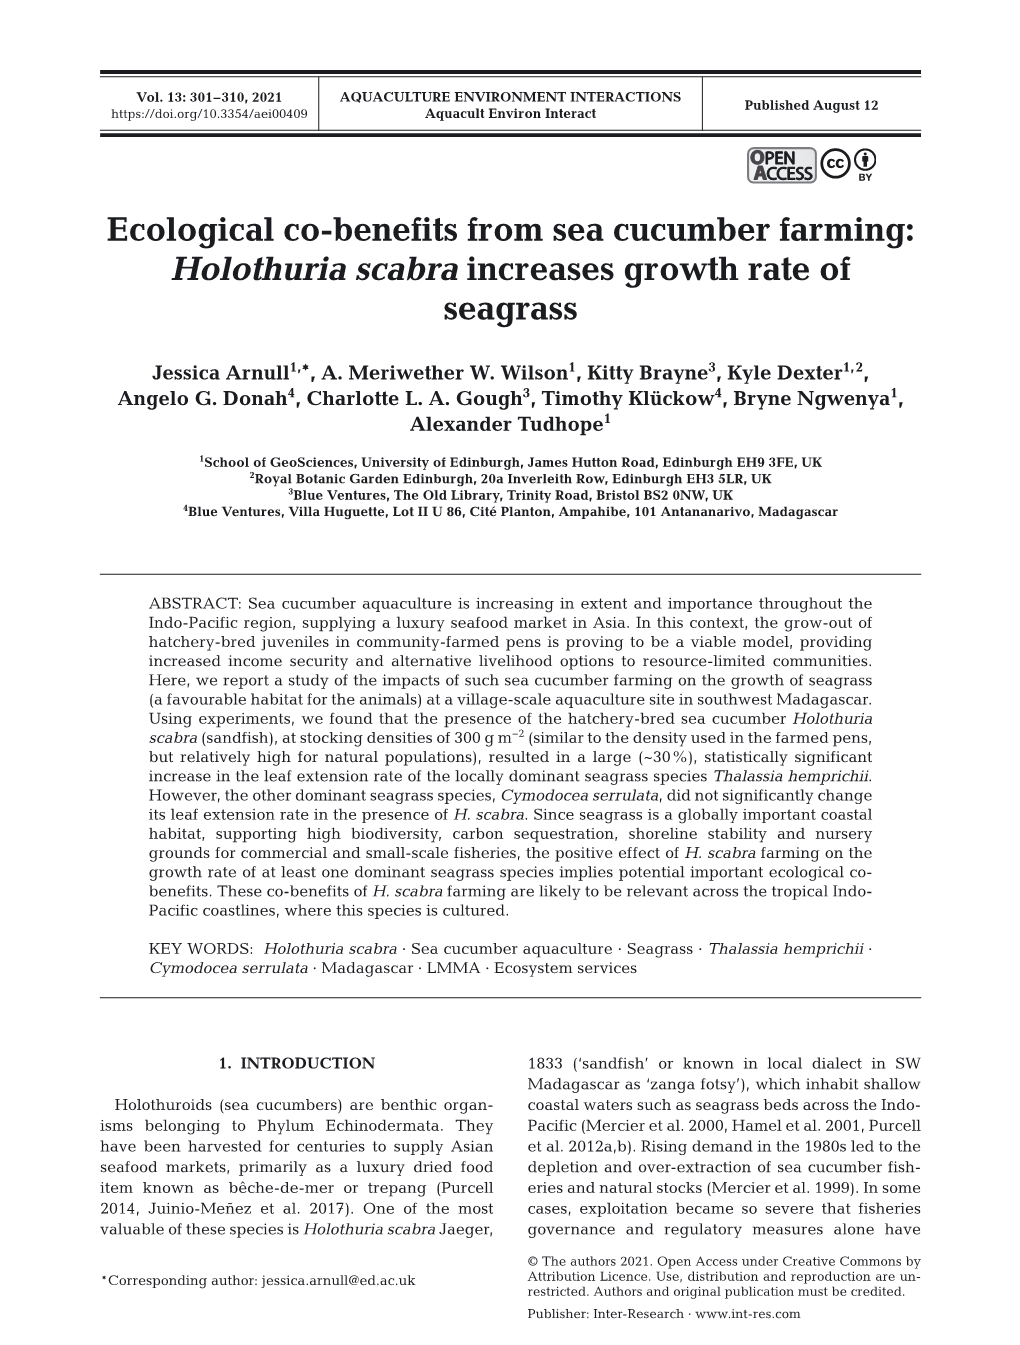 Holothuria Scabra Increases Growth Rate of Seagrass